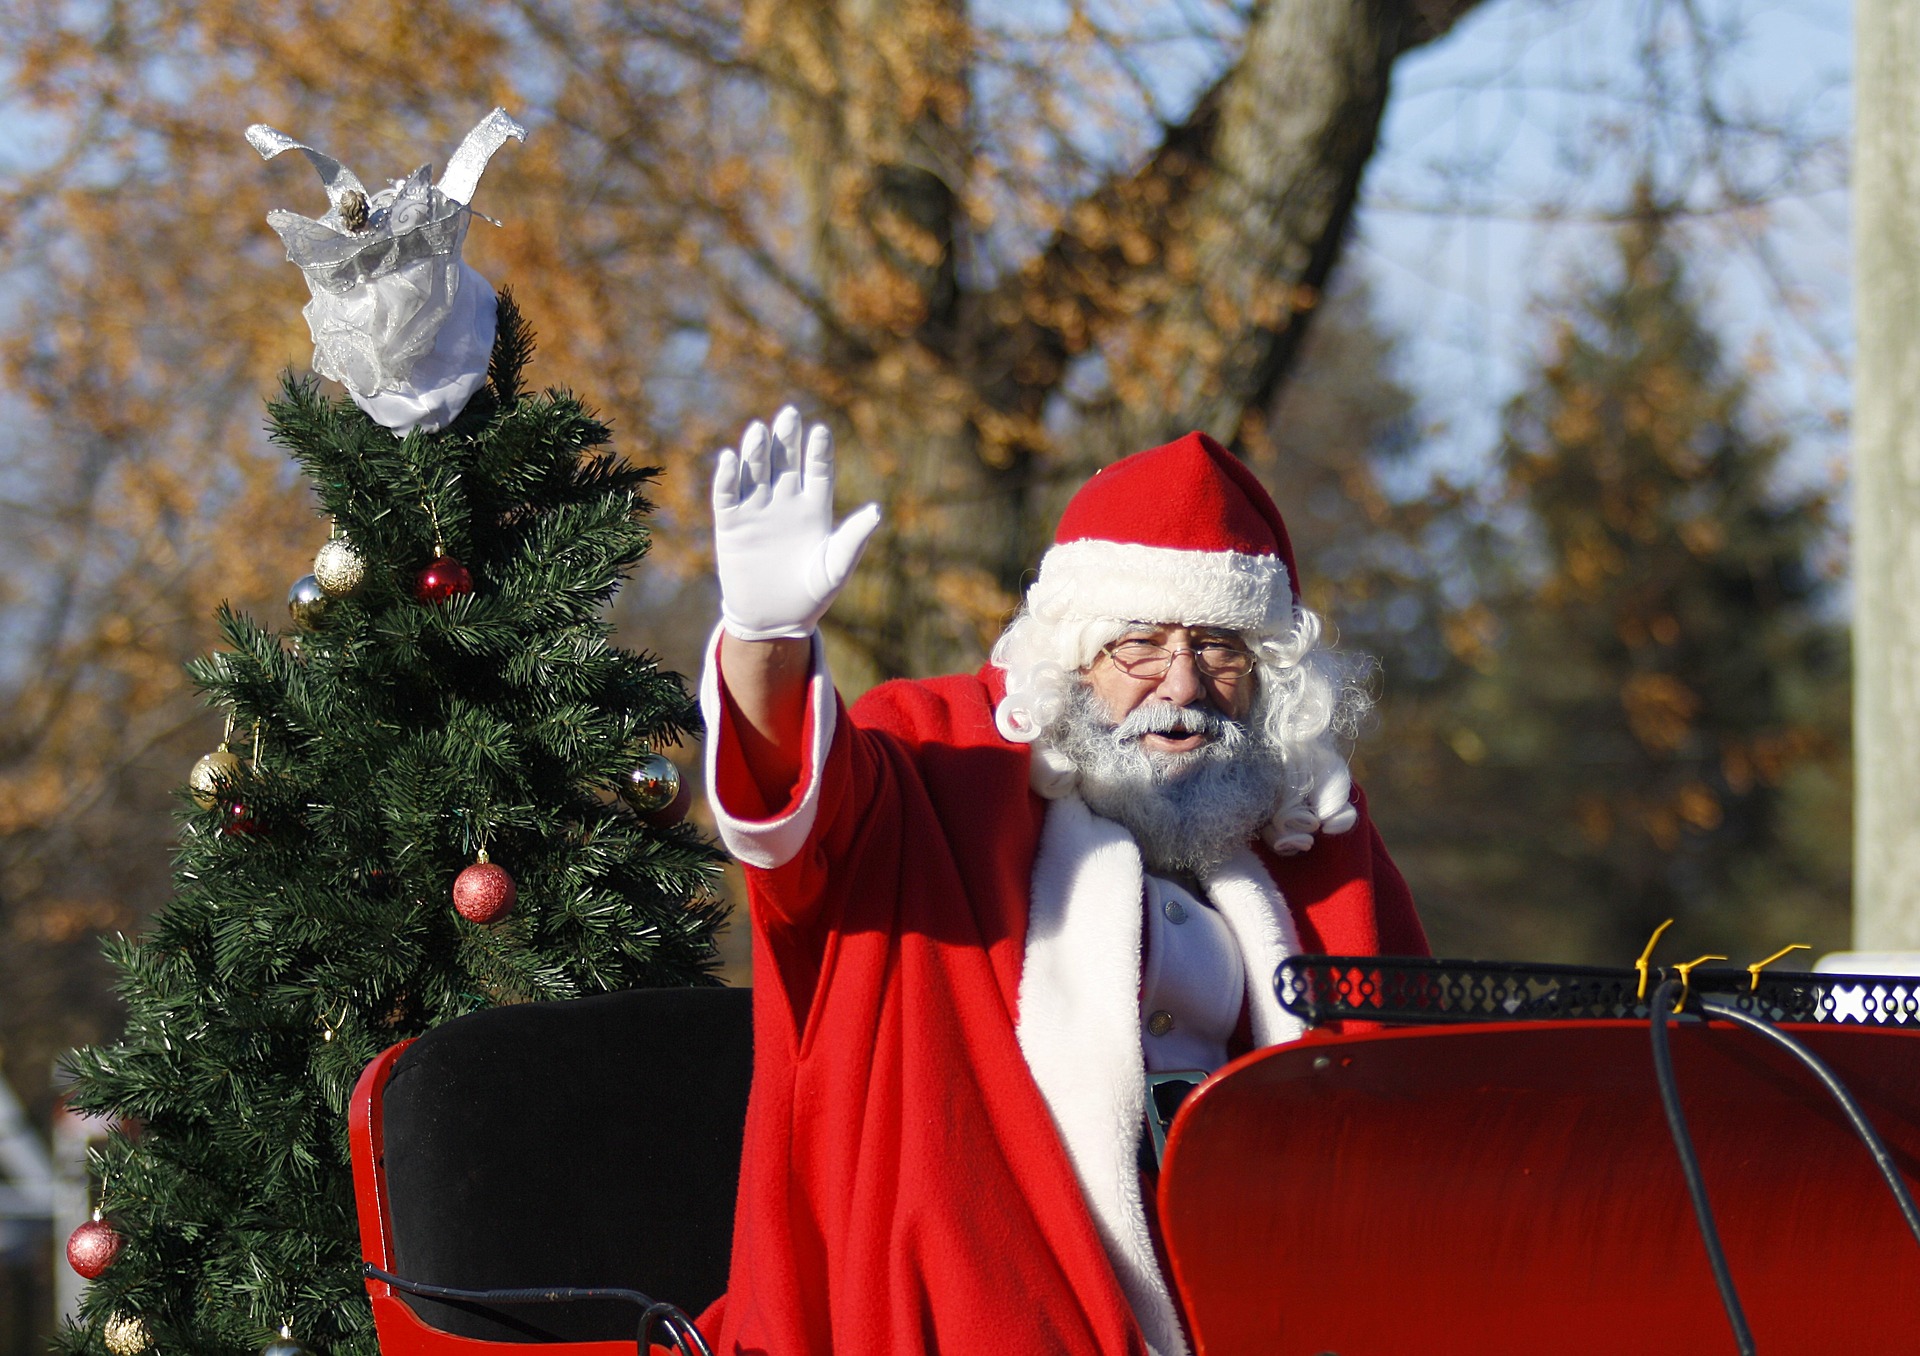 The 2019 Manchester Christmas Parade is Saturday, December 7th